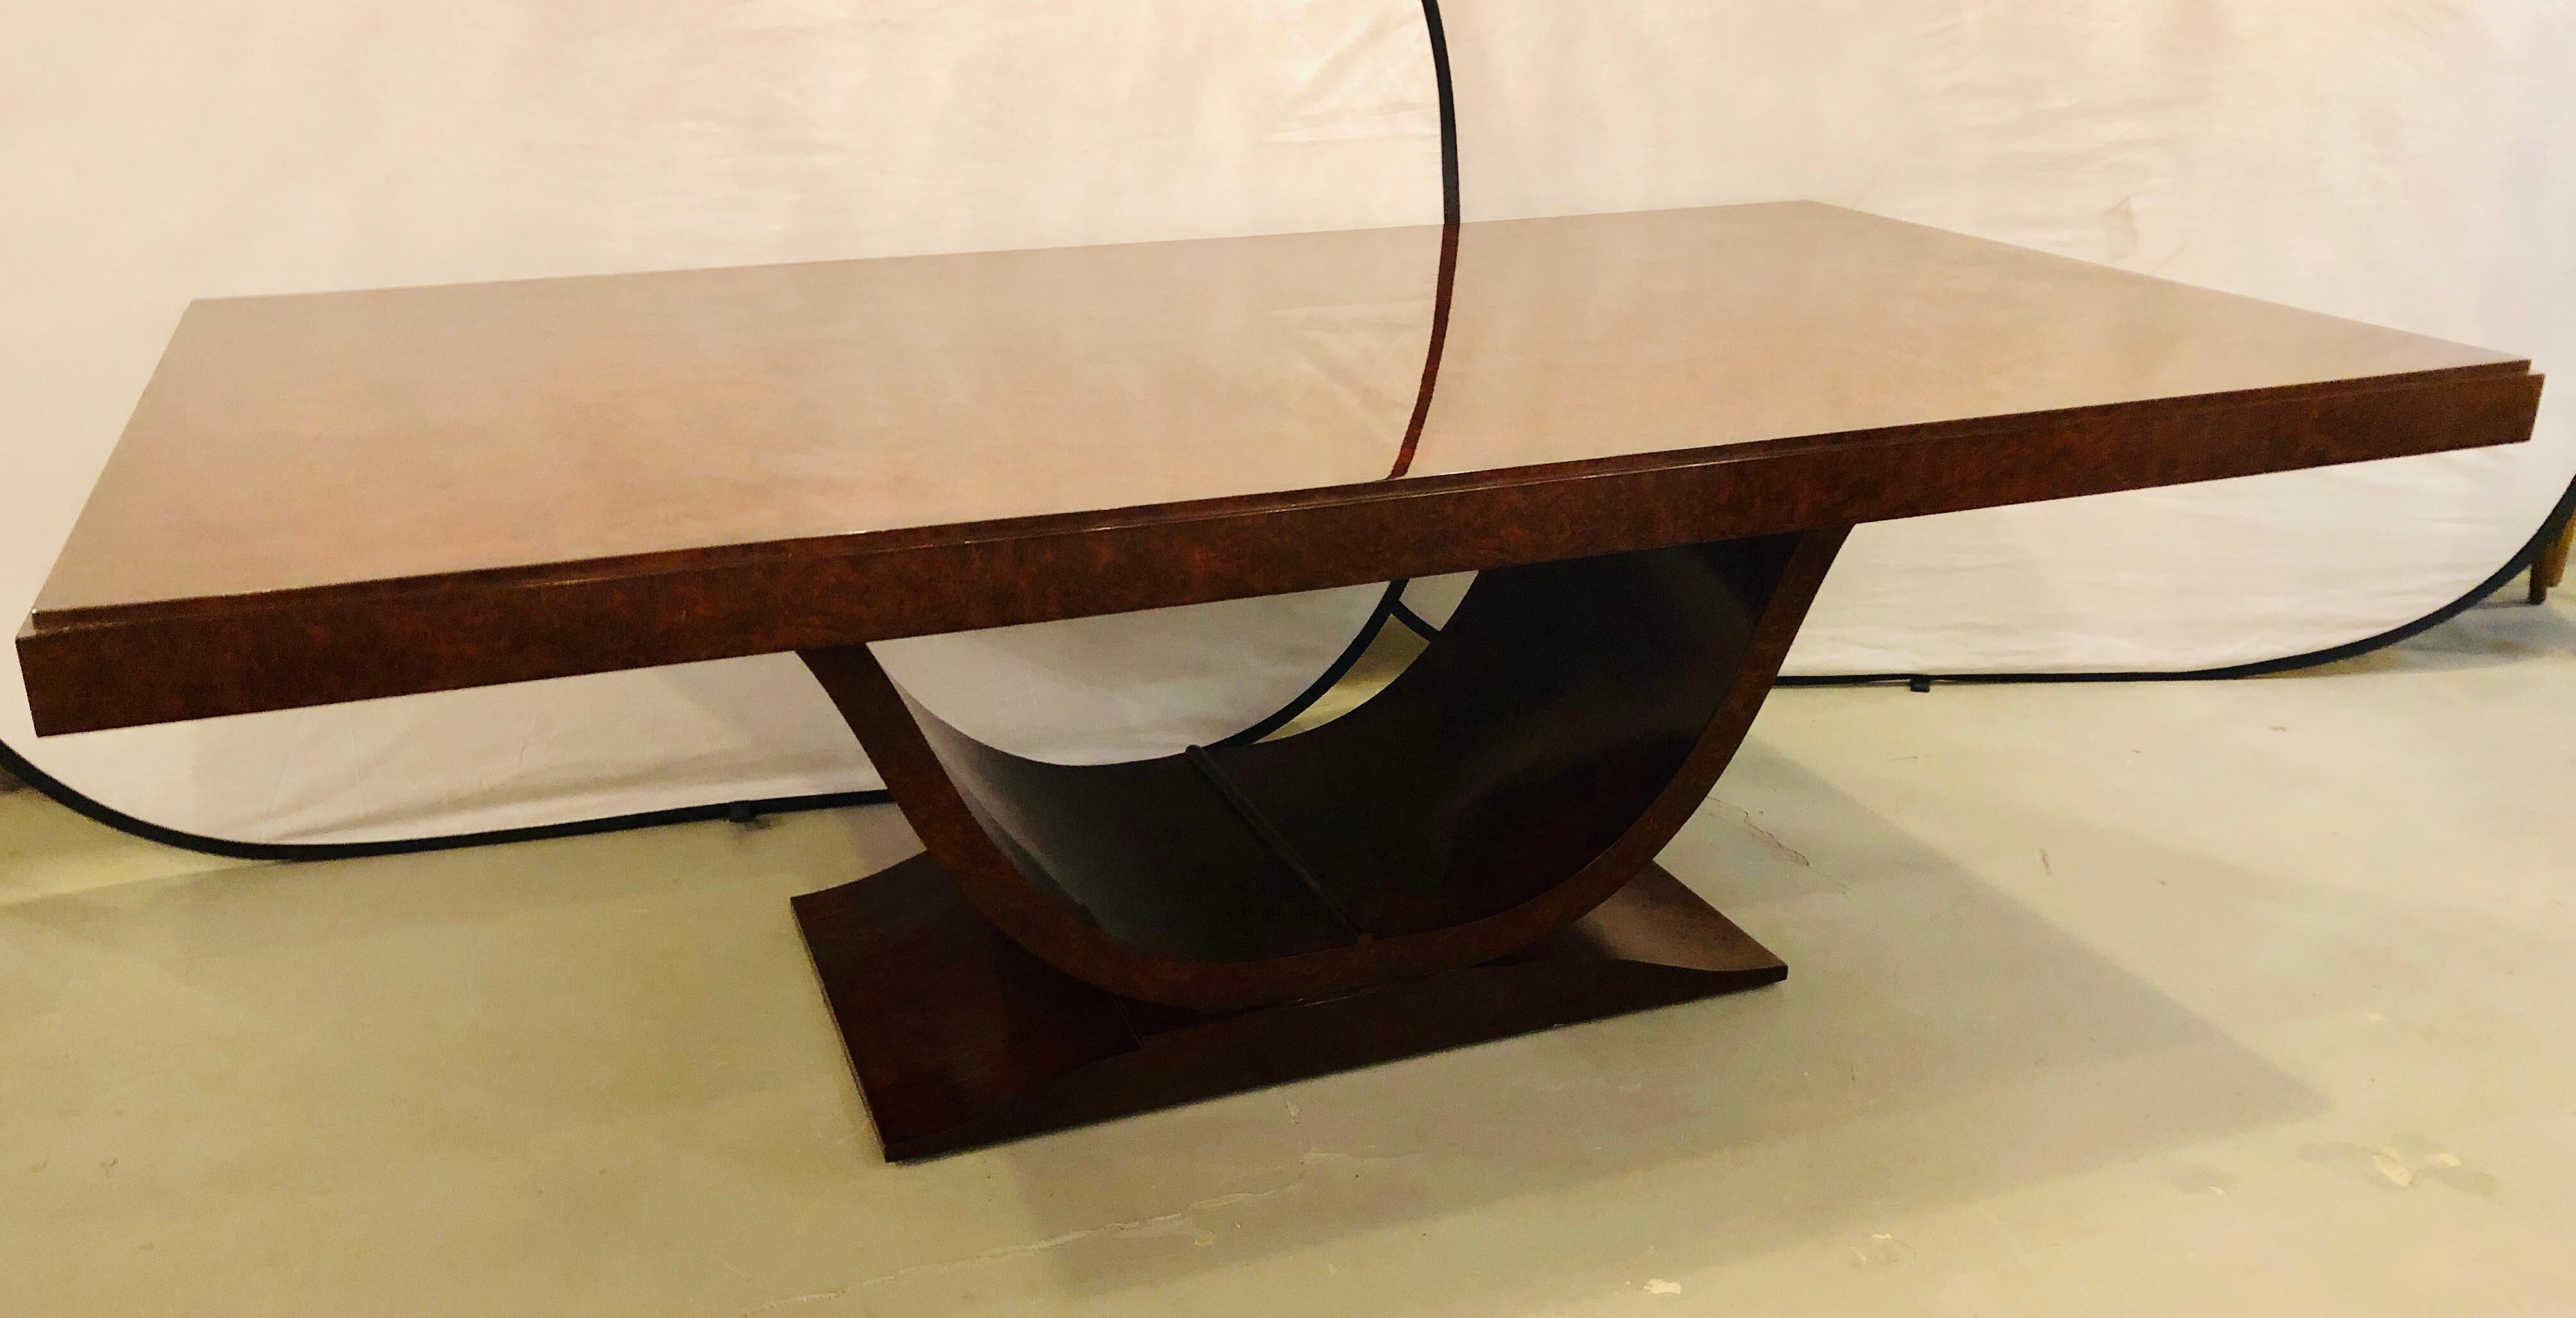 Émile-Jacques Ruhlman Style Burled Walnut Dining Table, French Art Deco Style
This elegant Art Deco silhouette defines this gorgeous table. Featuring a rich cocoa finish, hand rubbed to a satin soft gloss. Clean lines with sleek curves, this newly